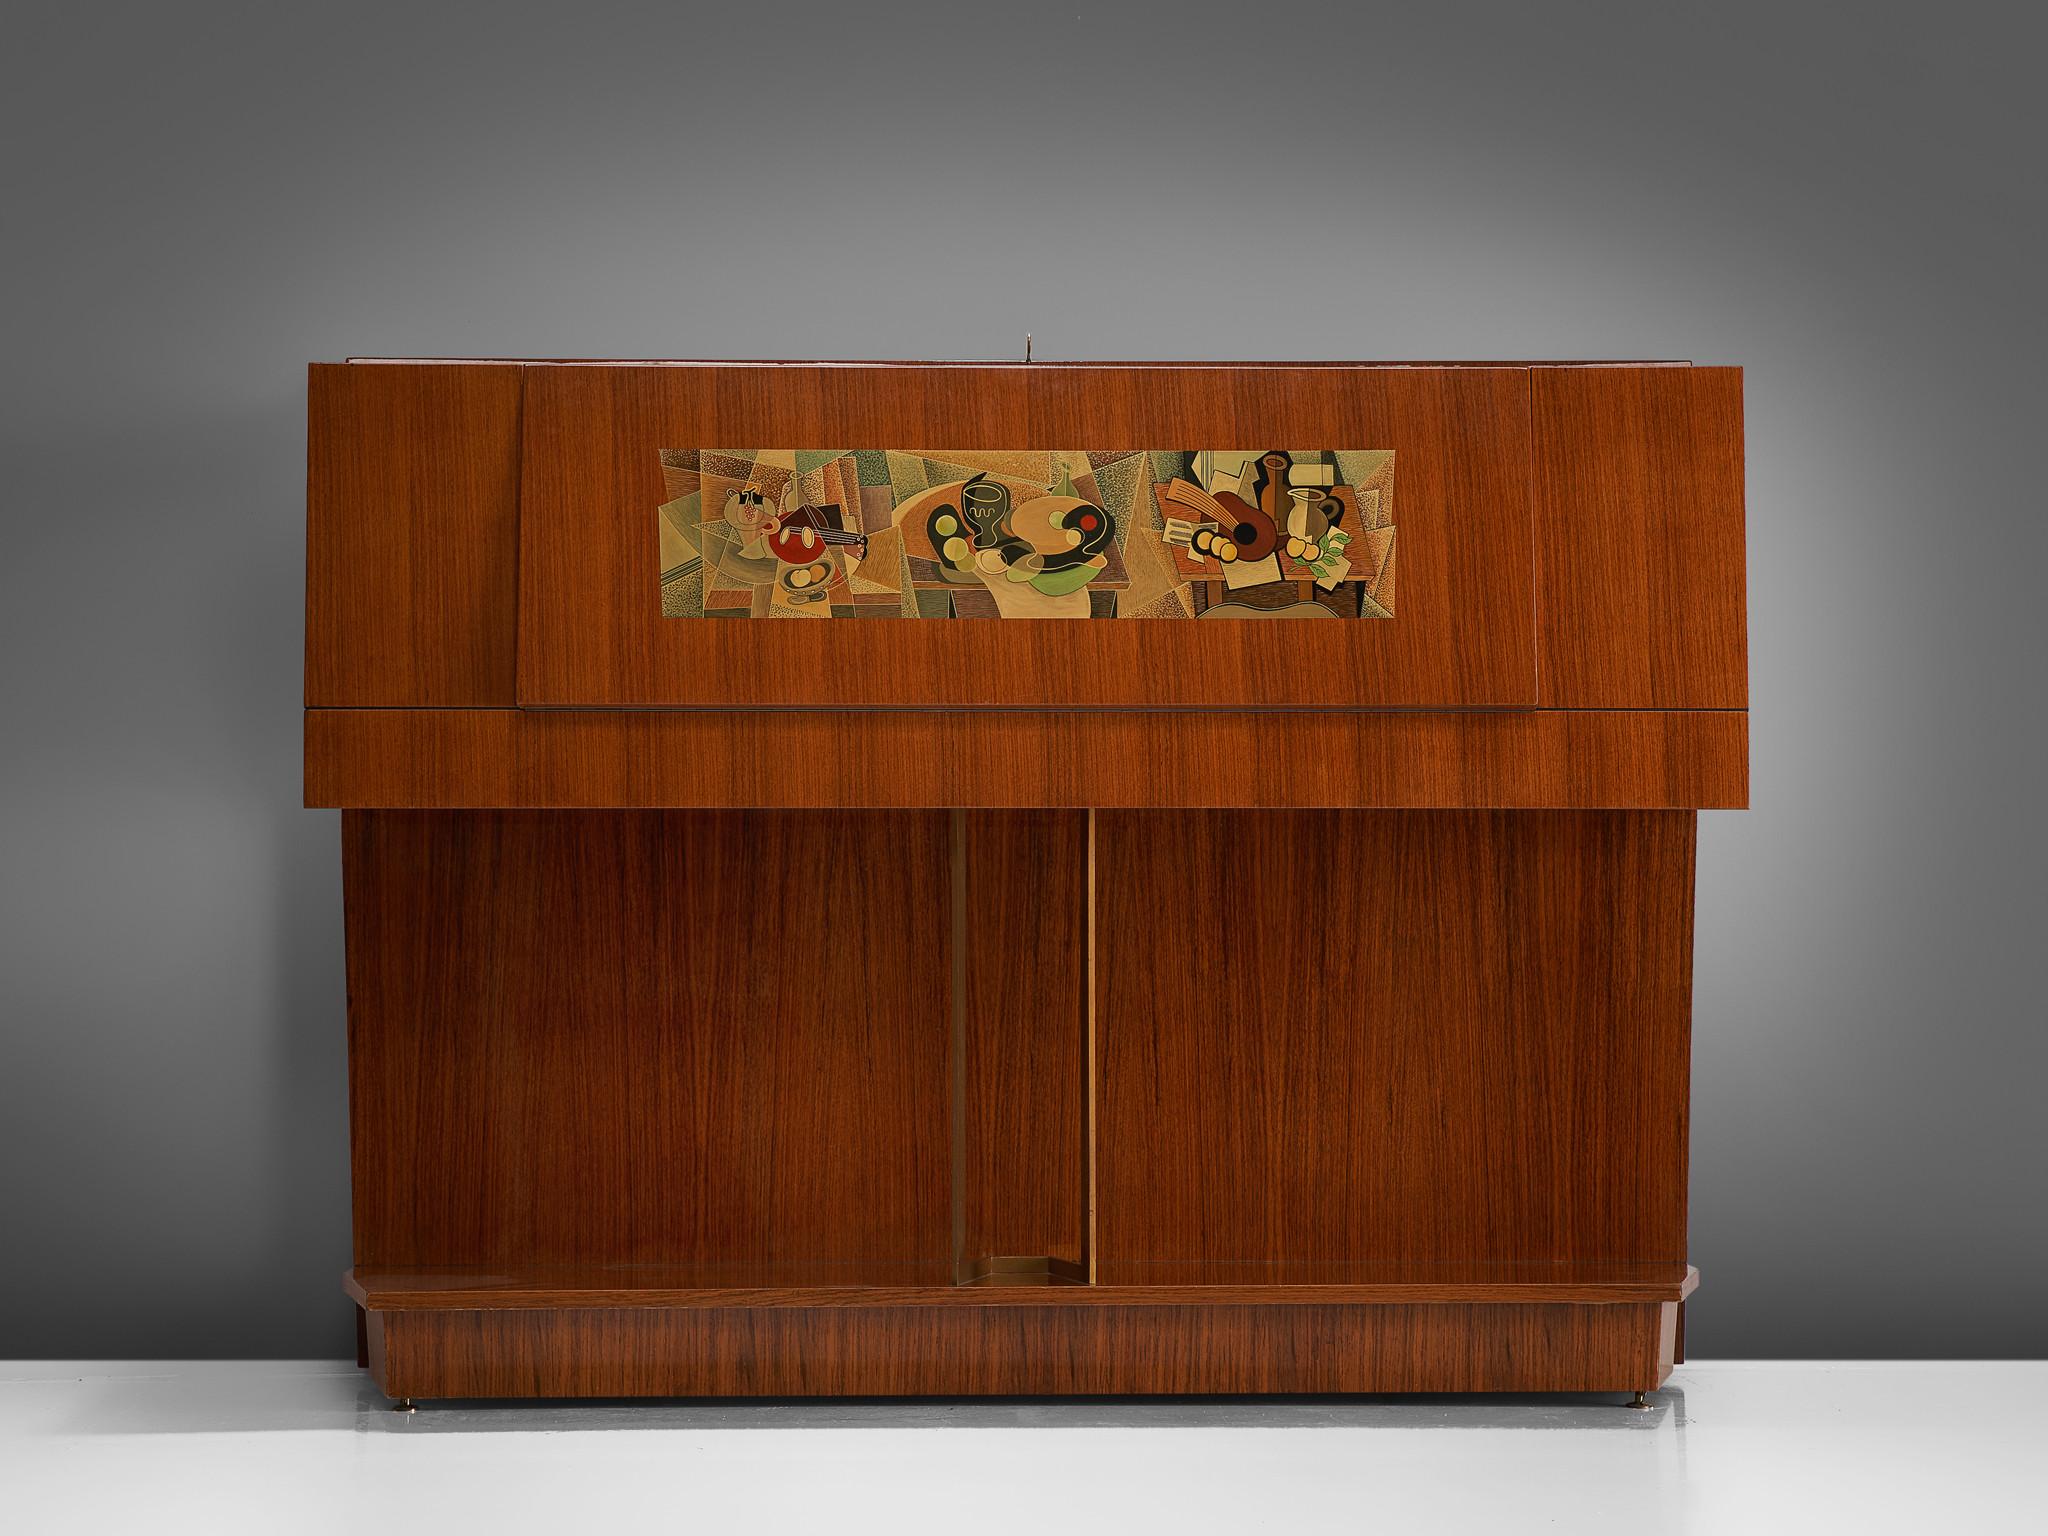 Vittorio Dassi, dry bar cabinet, walnut, birch, brass, glass, Italy, 1950s

Italian dry bar cabinet in walnut with decorative painting on the front by Gino Severini. The cabinet and its shape remind of a piano. On a long base stand two brass rods